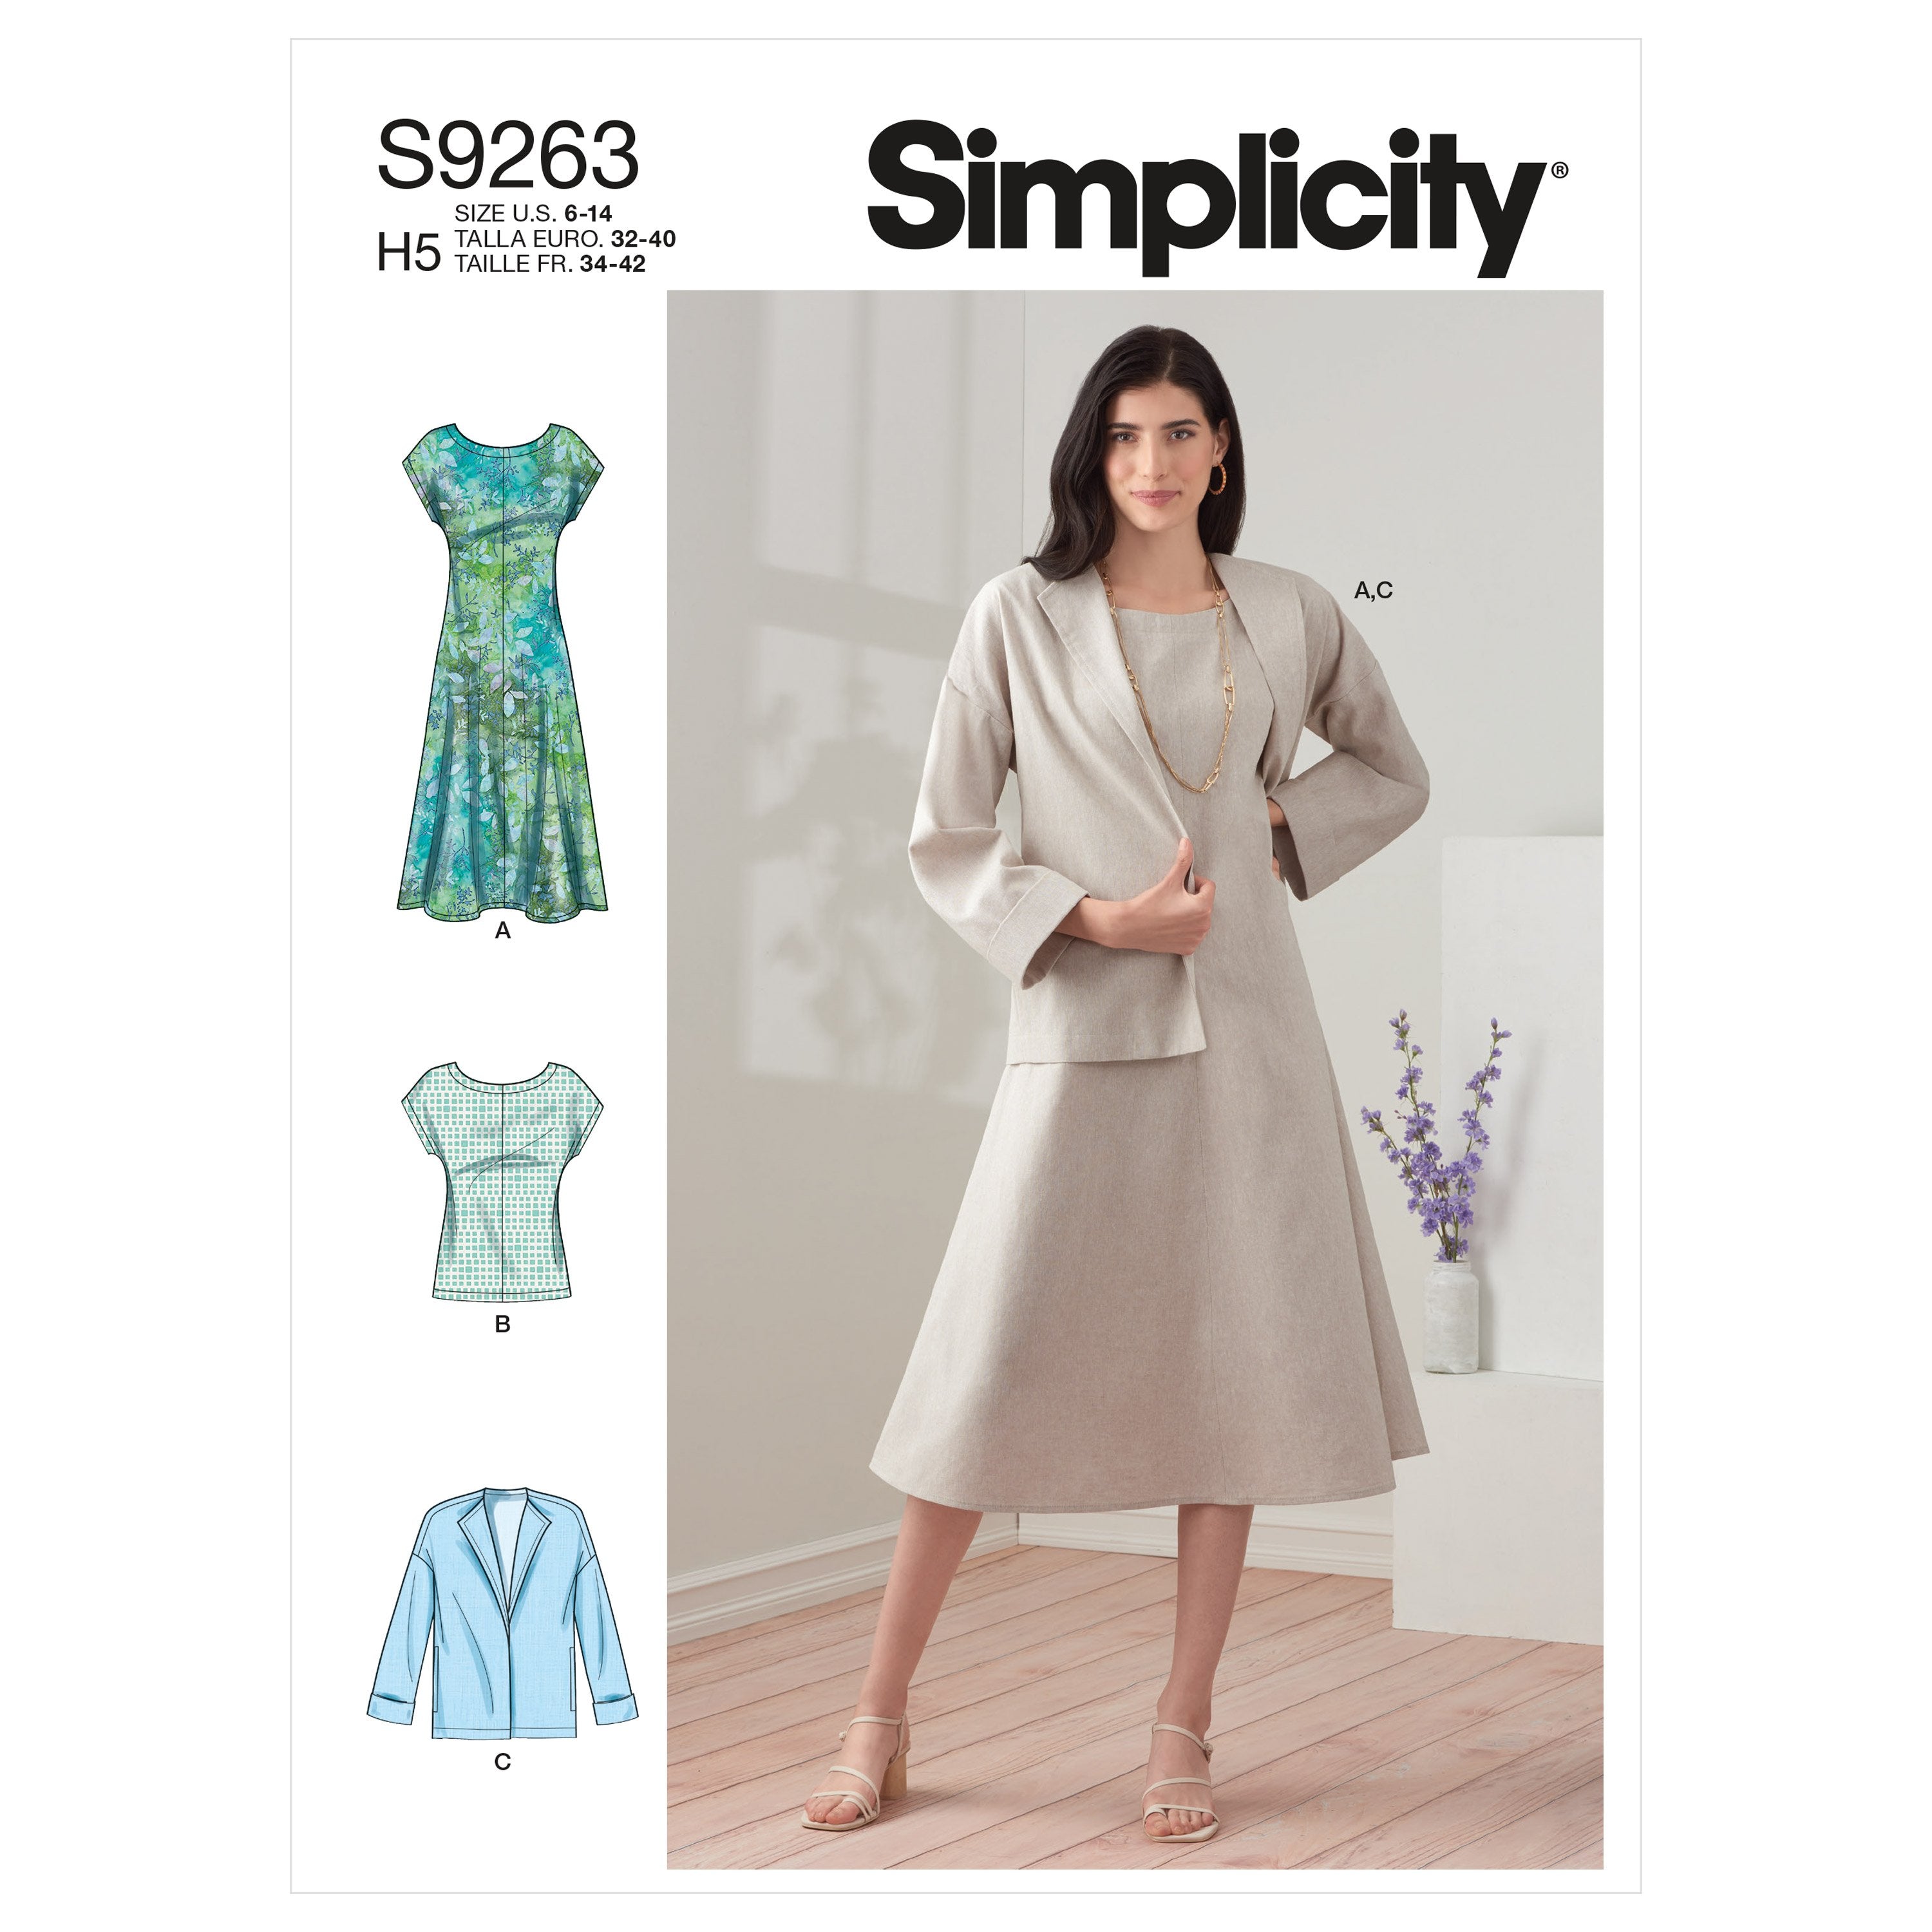 Simplicity Sewing Pattern 9263 Dress, Jacket and Top from Jaycotts Sewing Supplies